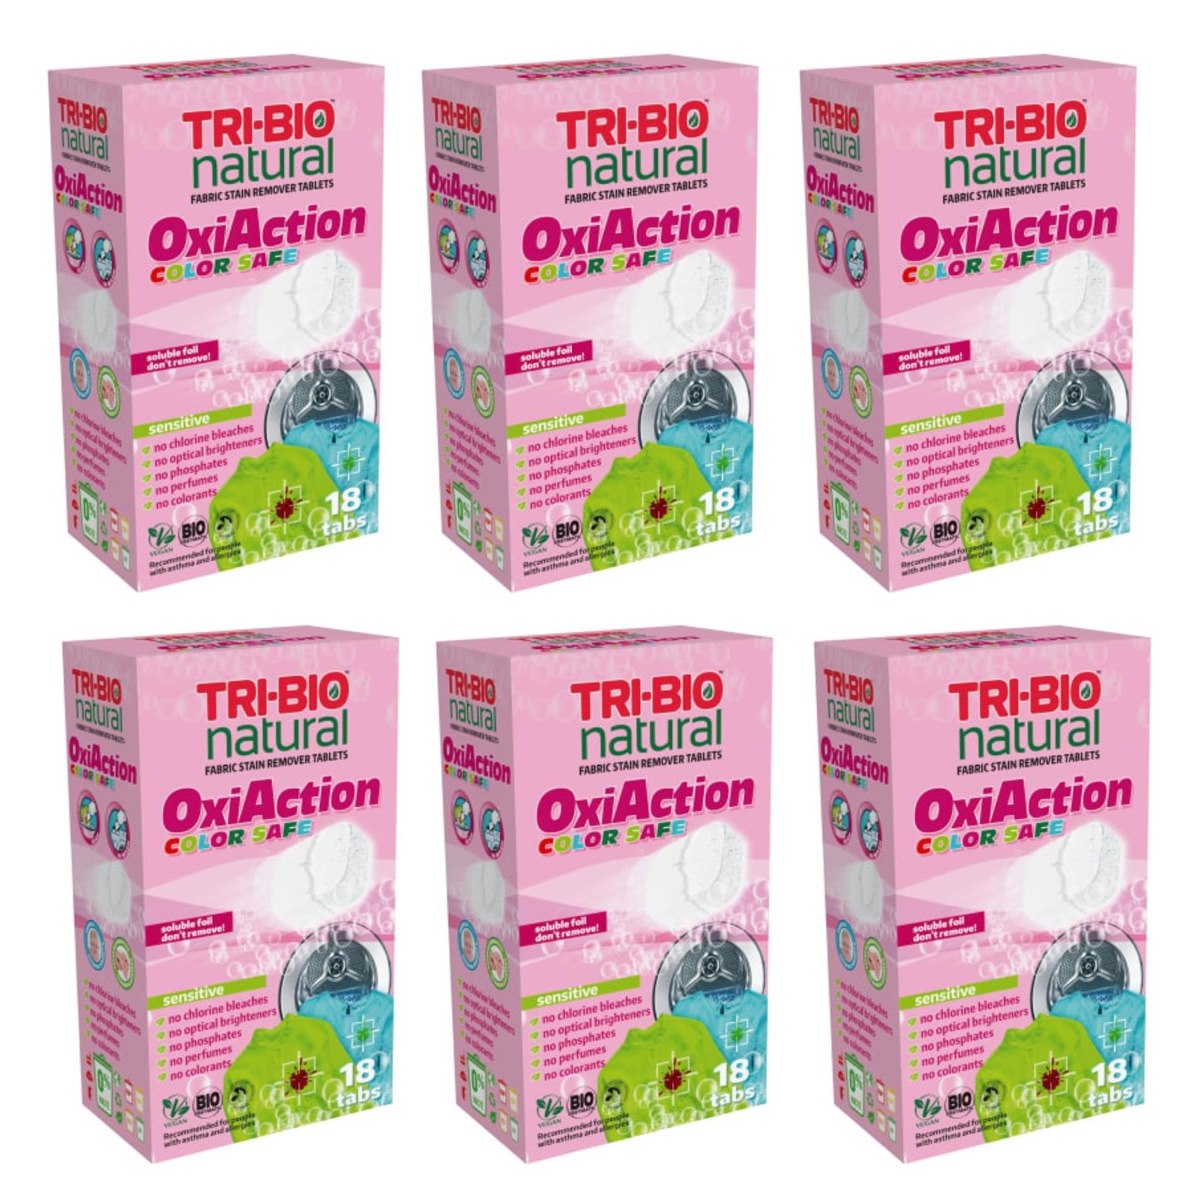 Case of 6 x TRI-BIO OxiAction Fabric Stain Remover Tablets (18) Color Safe